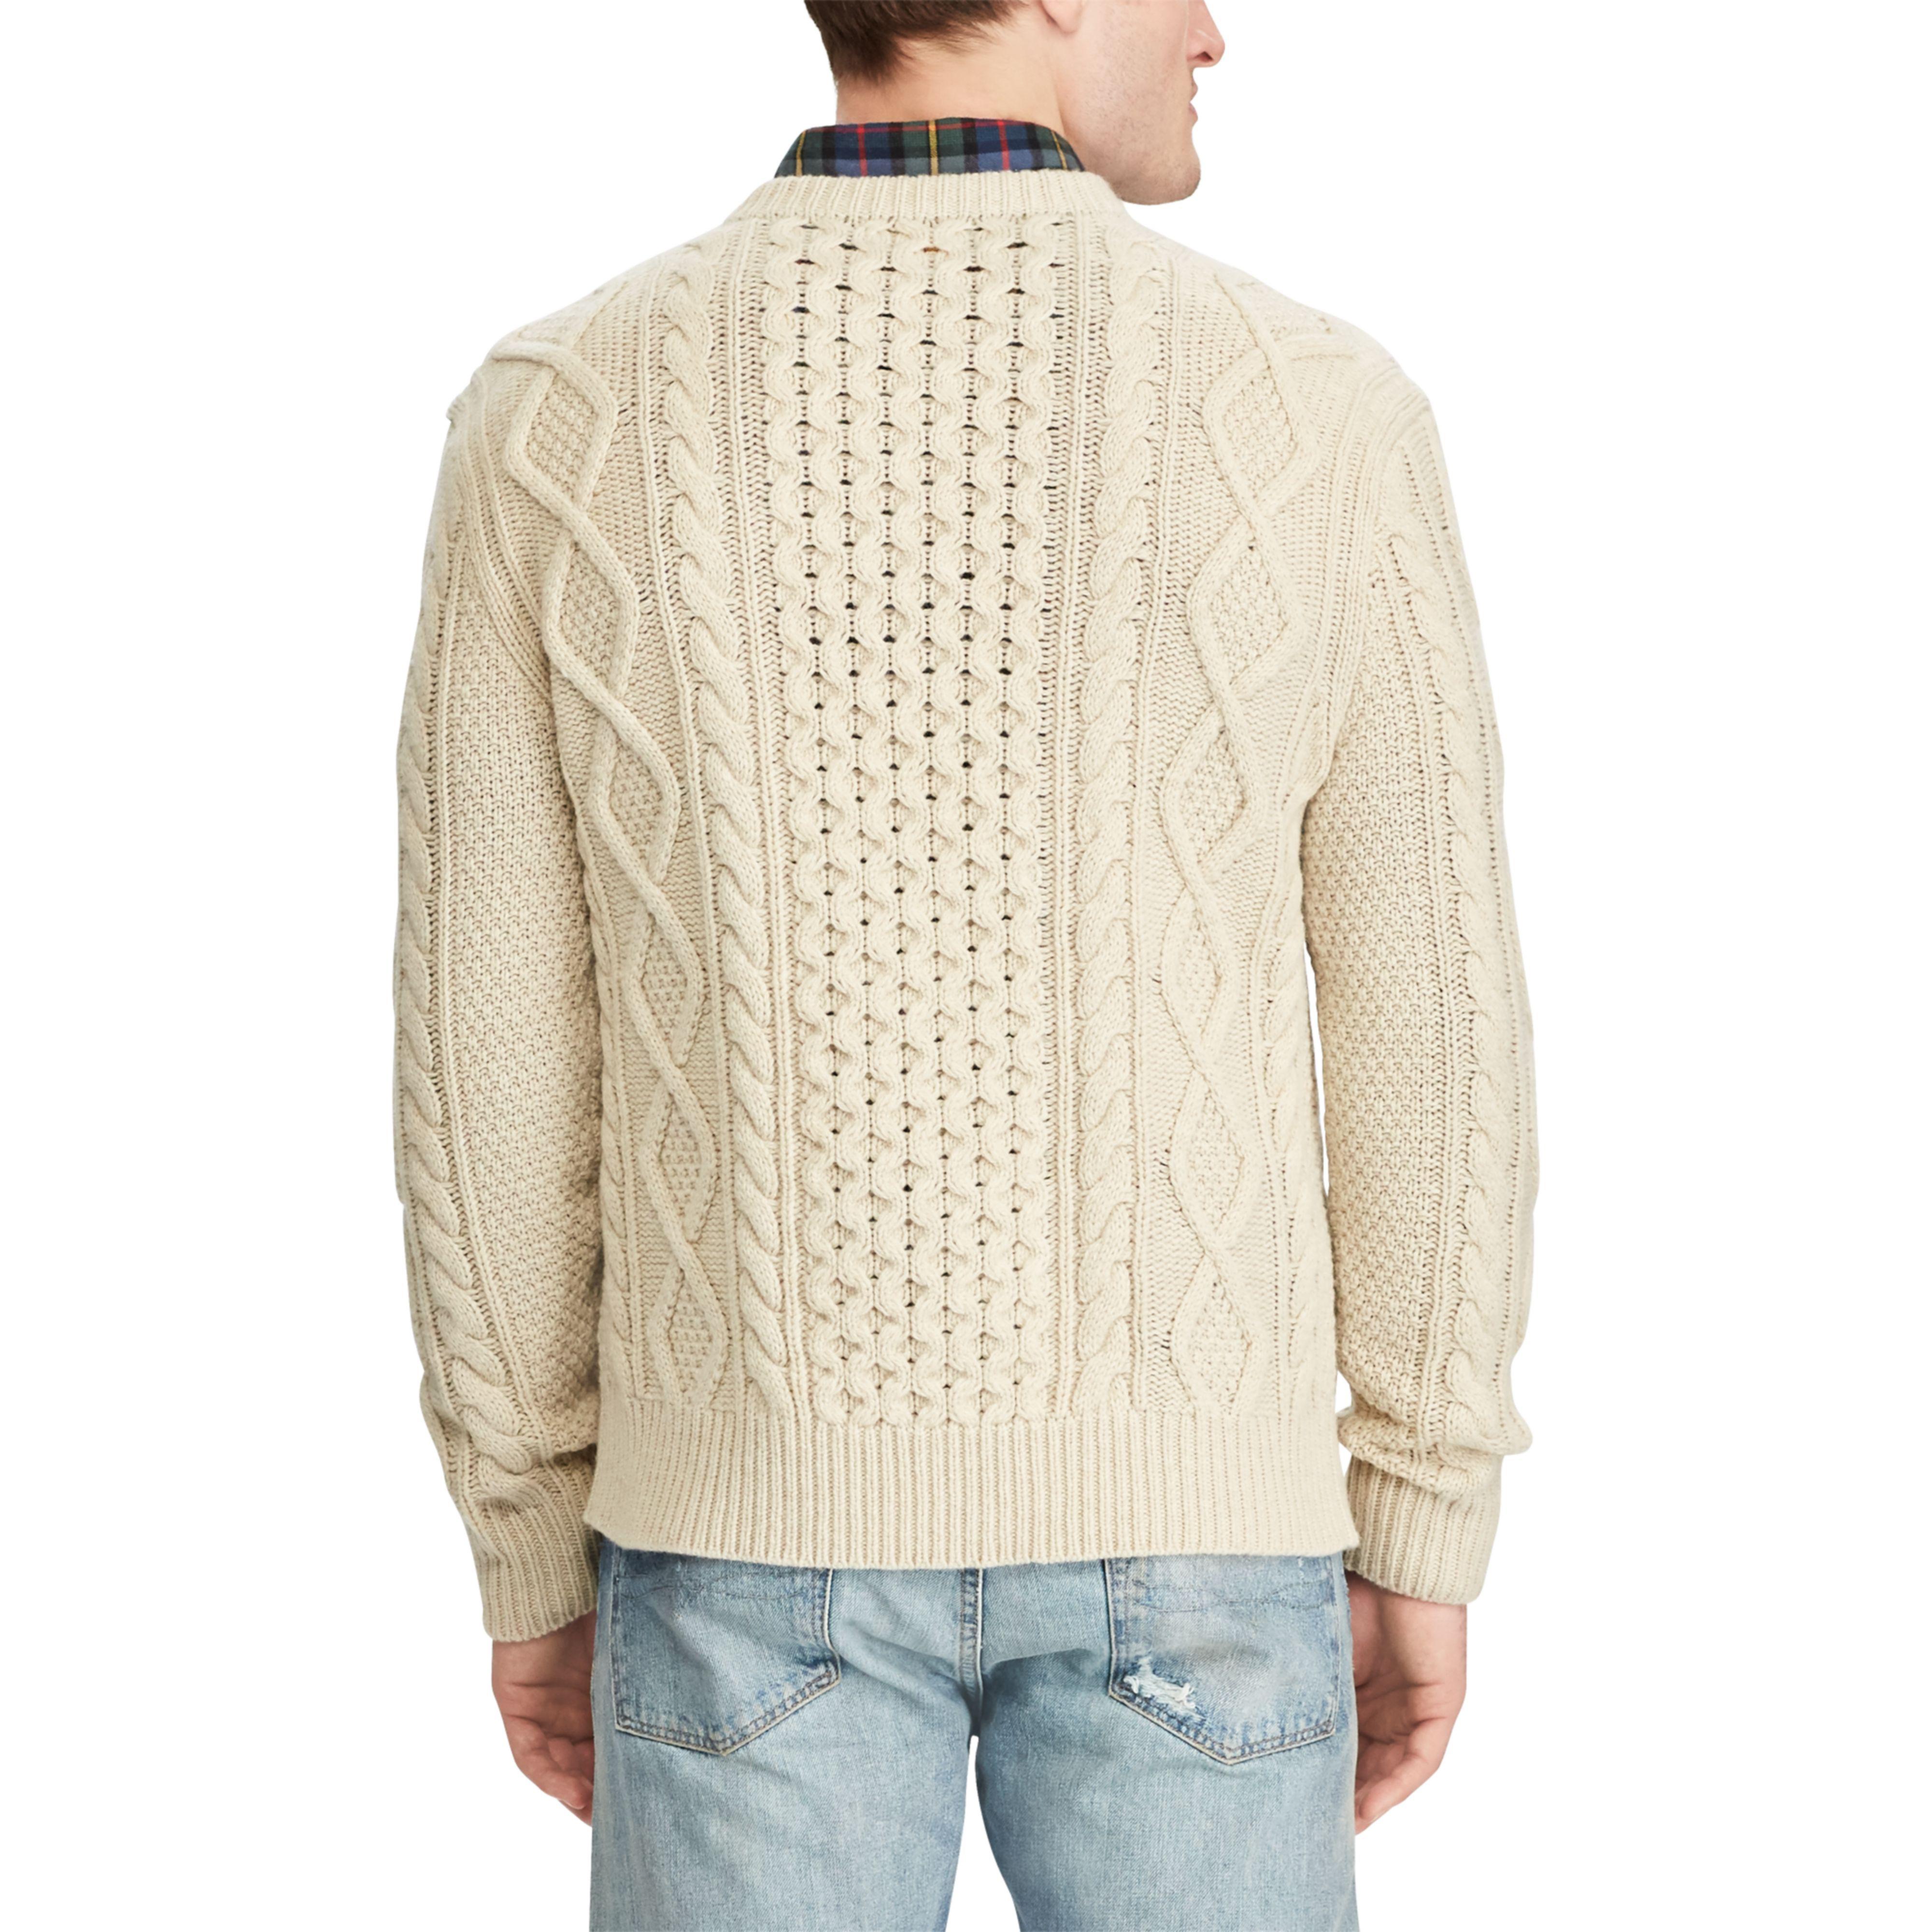 Lyst Polo Ralph  Lauren  The Iconic Fisherman  s Sweater  